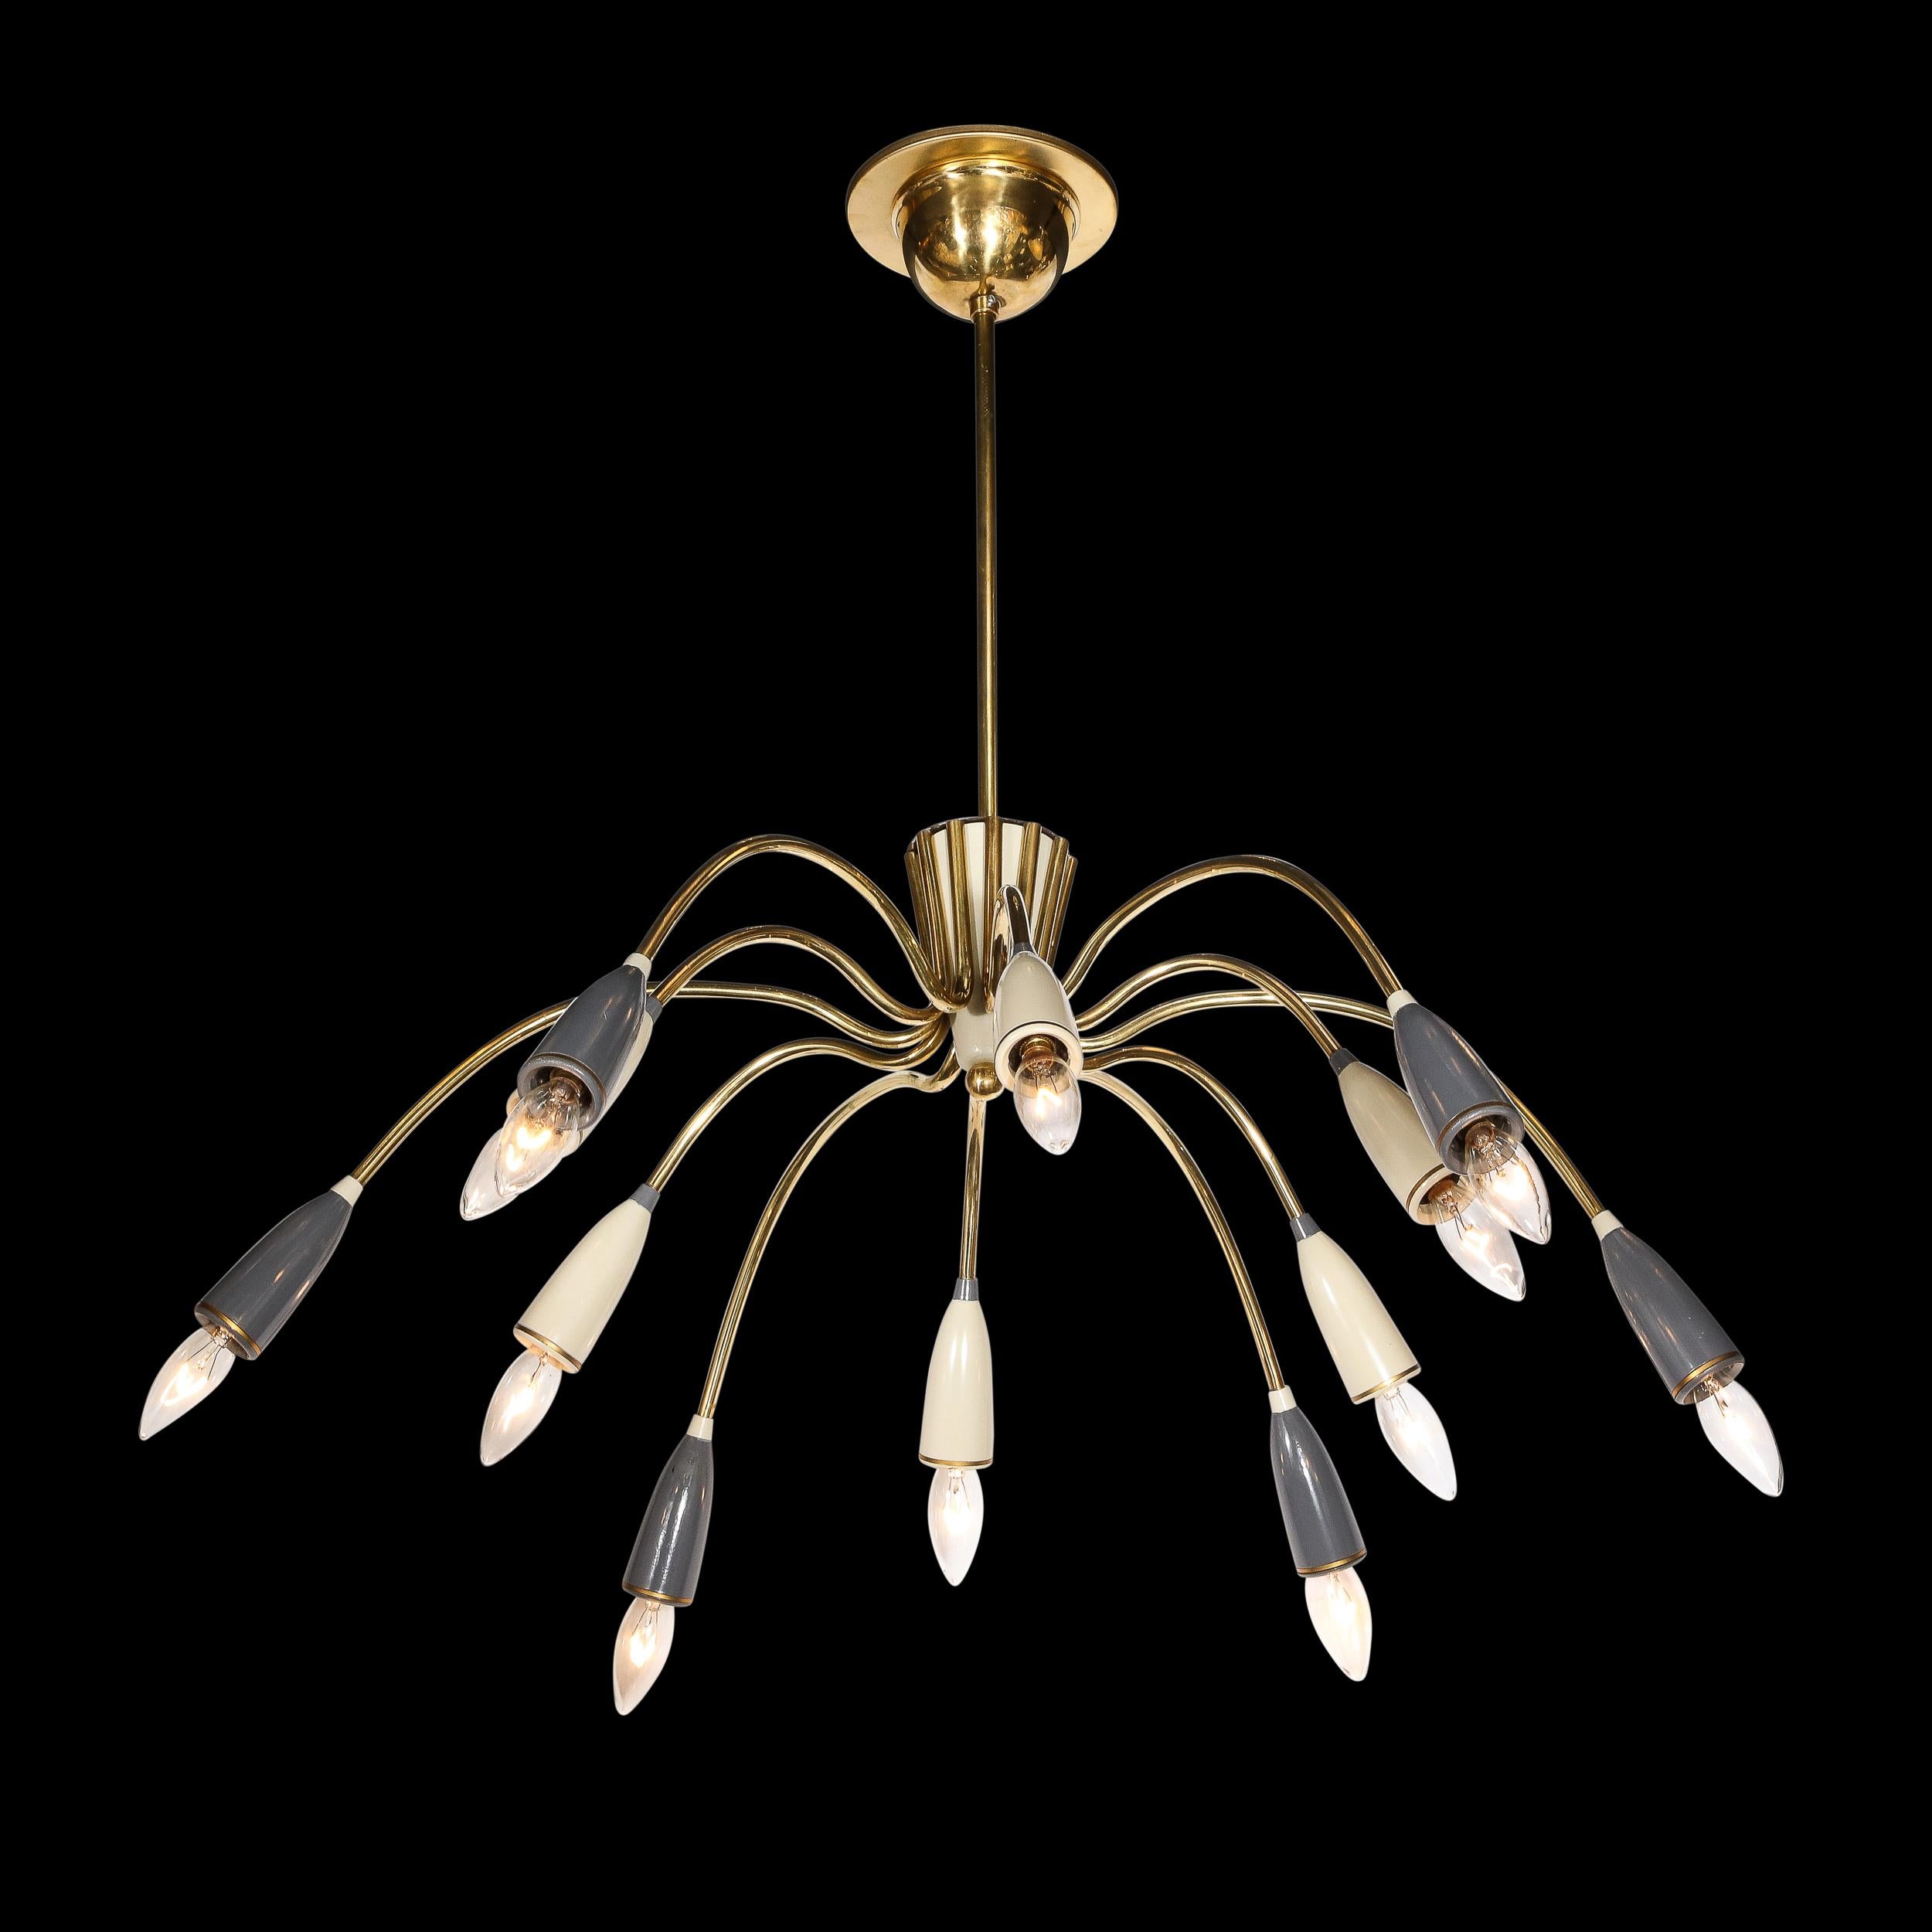 This beautiful and sophisticated Mid-Century Modernist Twelve Arm Brass and Enamel Chandelier is by the company Stilnovo and originates from Italy, Circa 1950. Featuring an expansive profile with twelve arms at alternating levels of extension from a